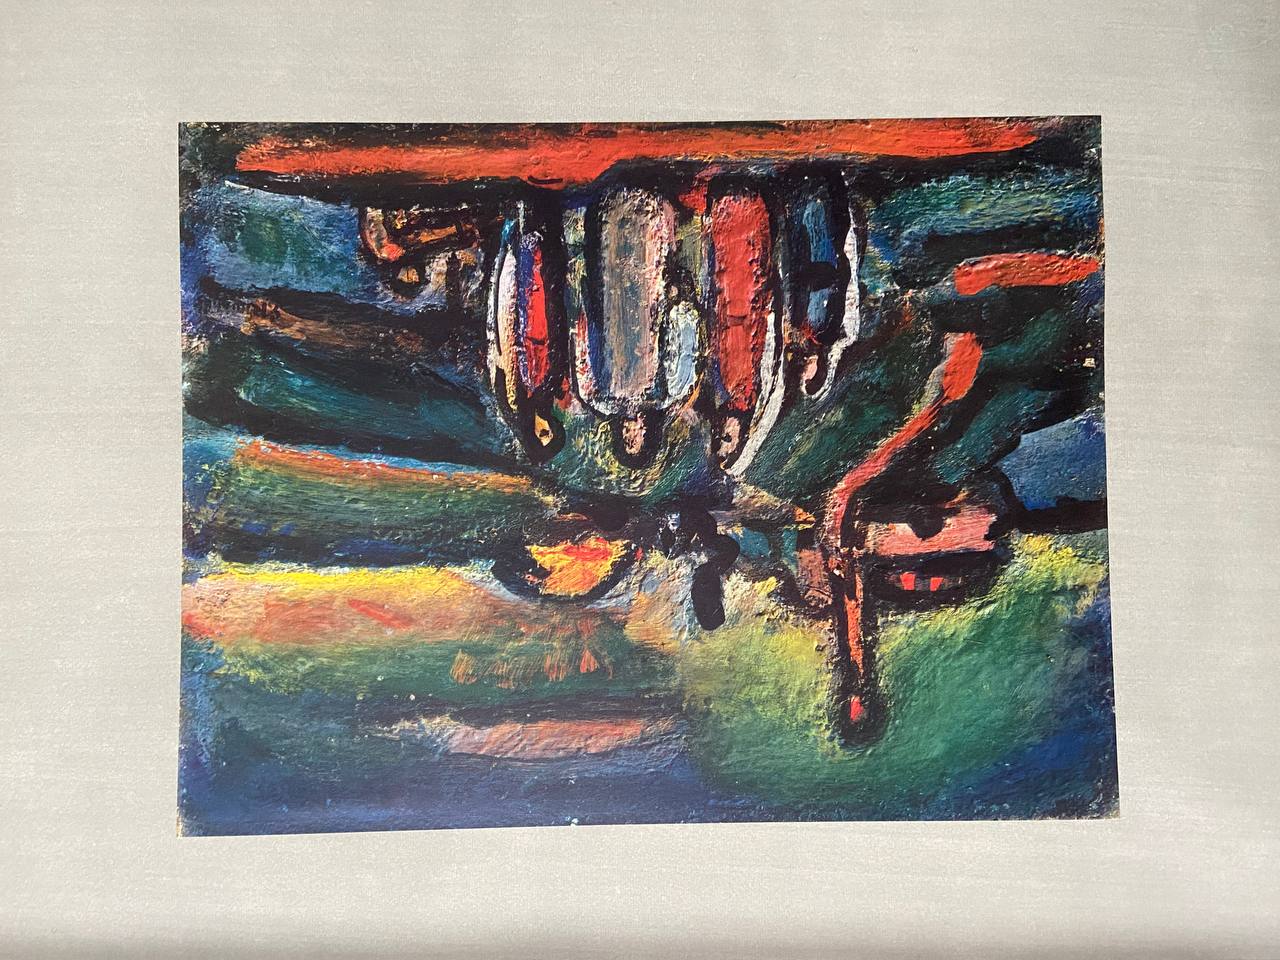 Georges Rouault - Couches de soleil (1947) - Georges Rouault, Heliogravure - Hedonism Gallery